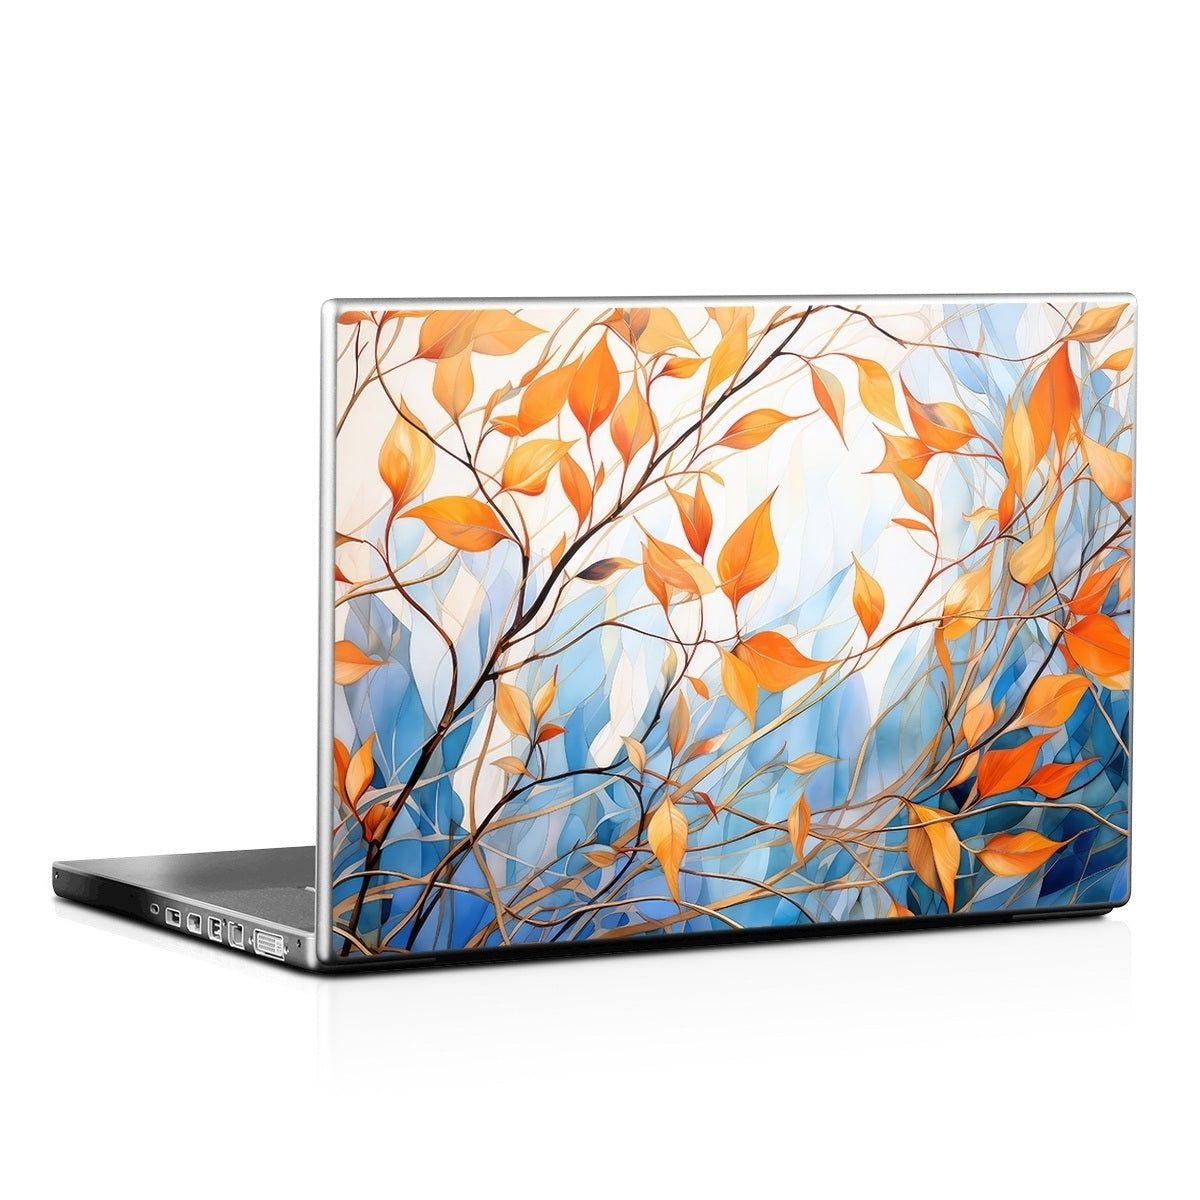 Blustery Day - Laptop Lid Skin